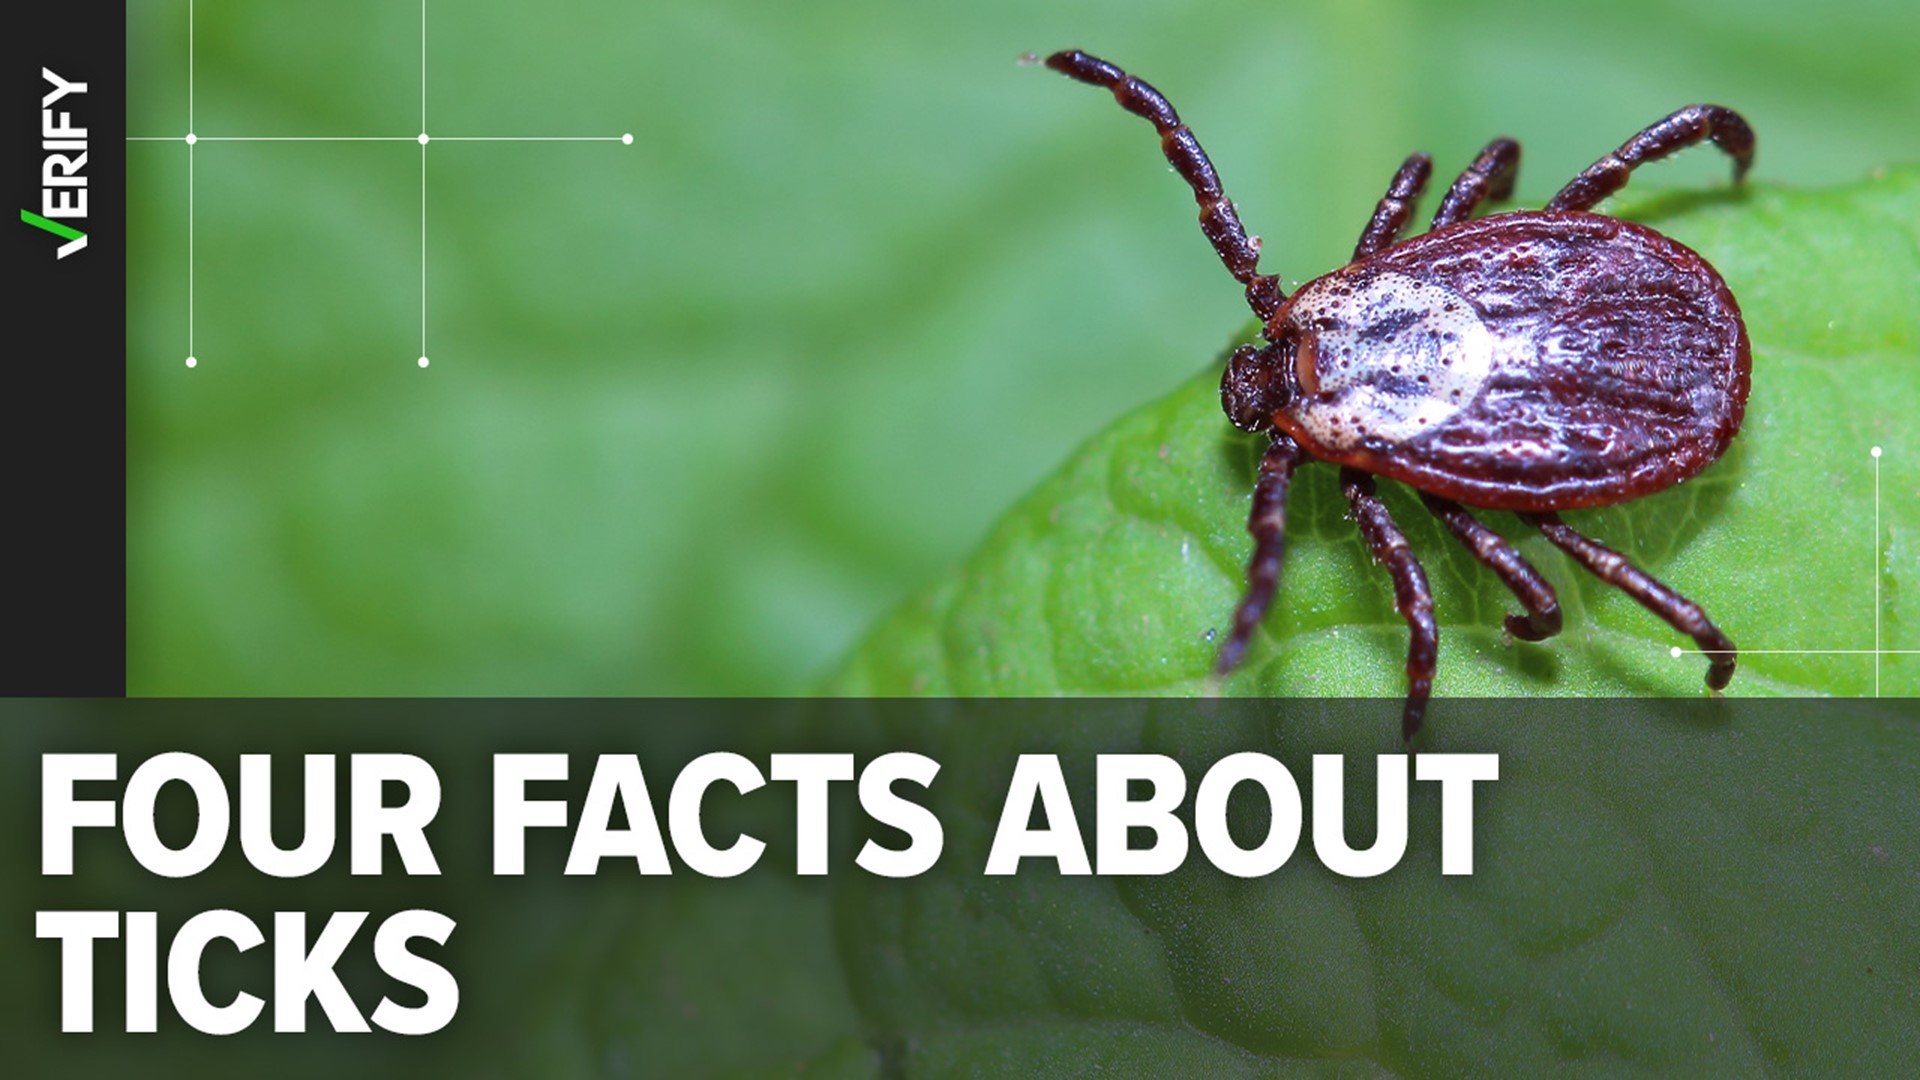 We VERIFY four facts about ticks and share tips on how to avoid getting a tick bite this summer.